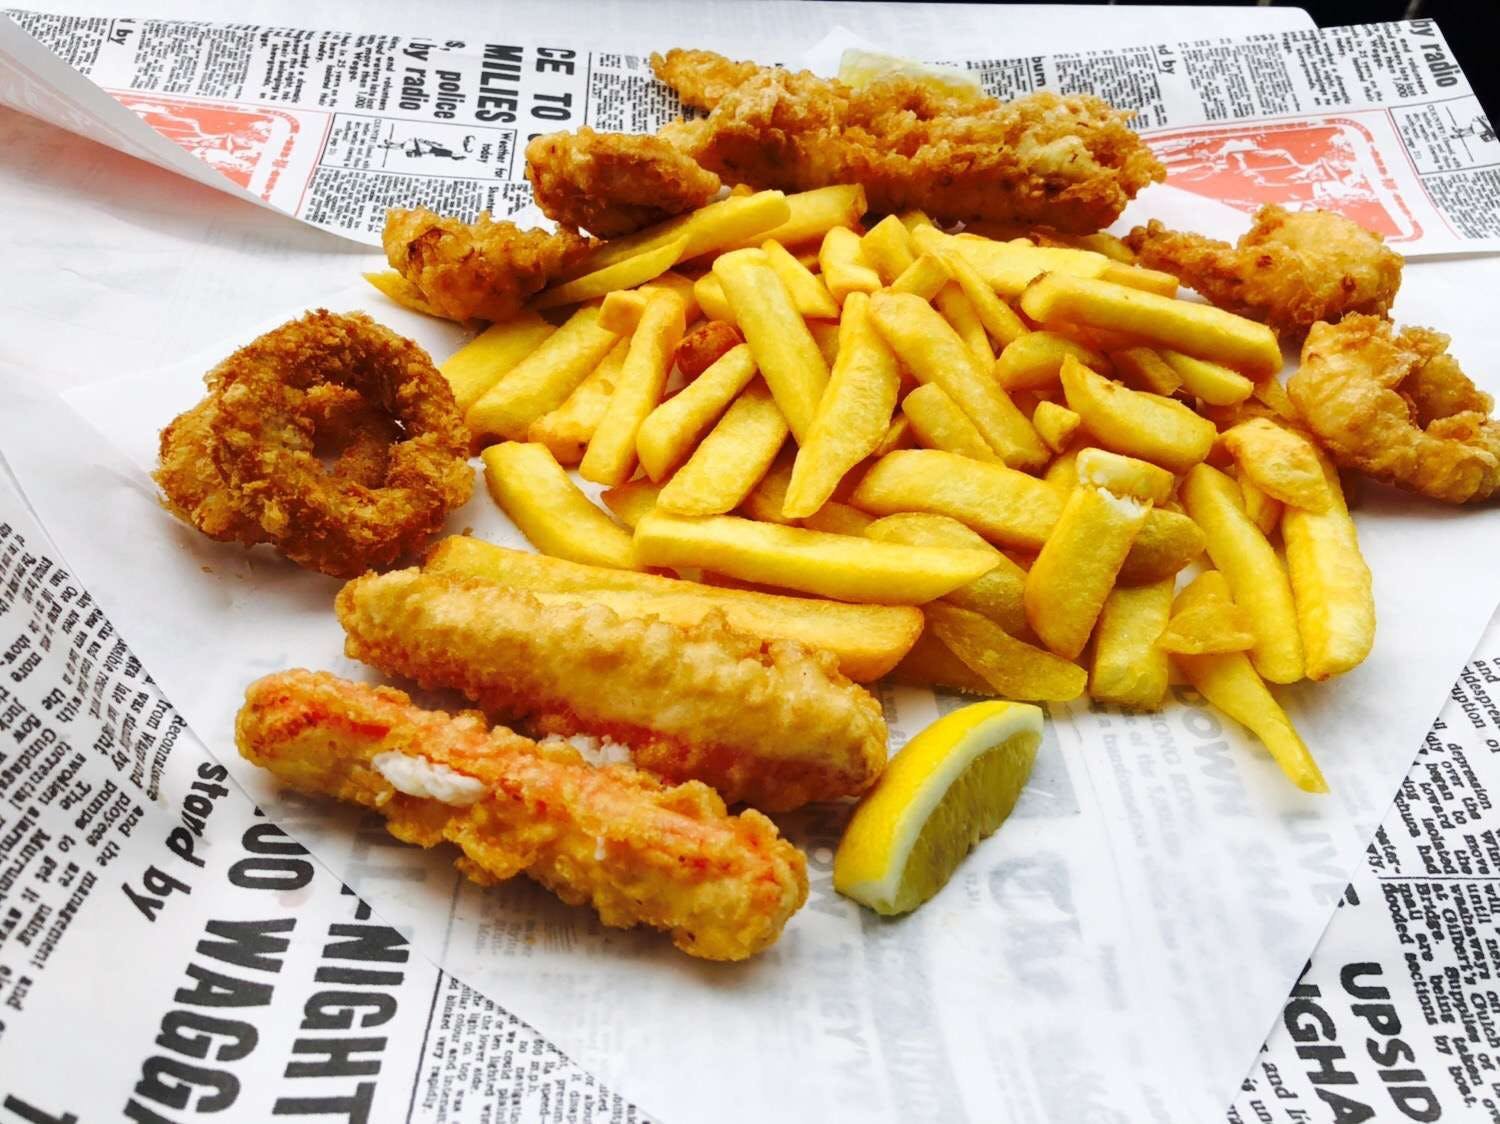 Oakleigh Fish  Chippery - Tourism Gold Coast